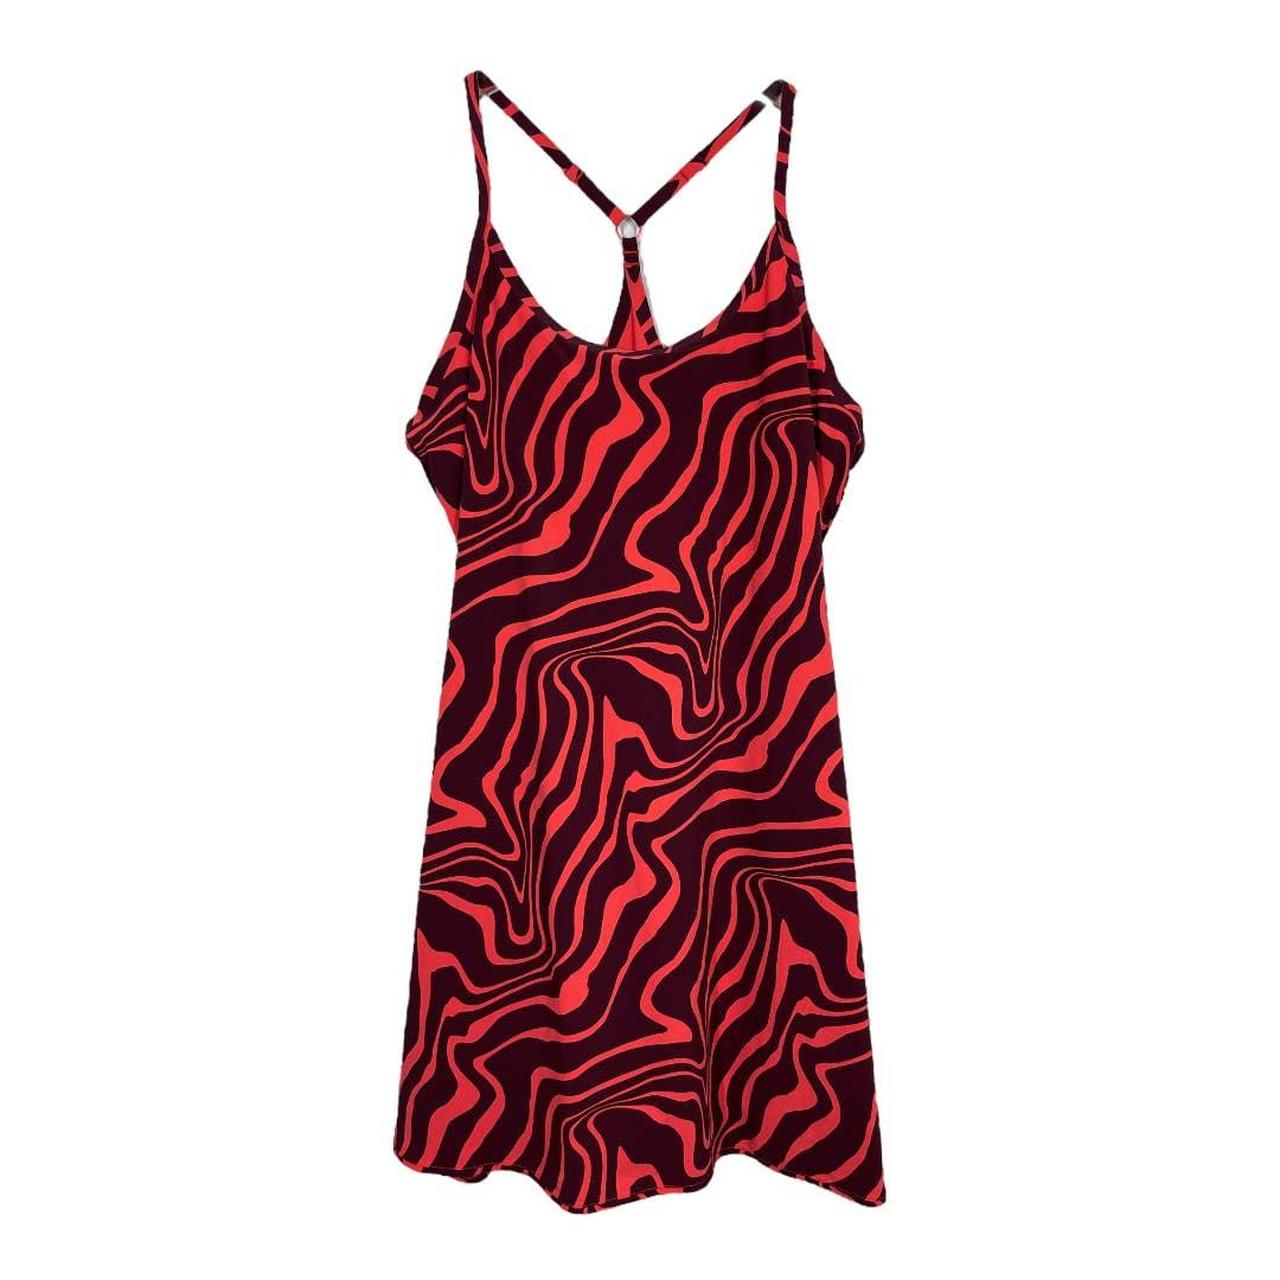 Outdoor Voices The Exercise Dress in Poppy Swirl.